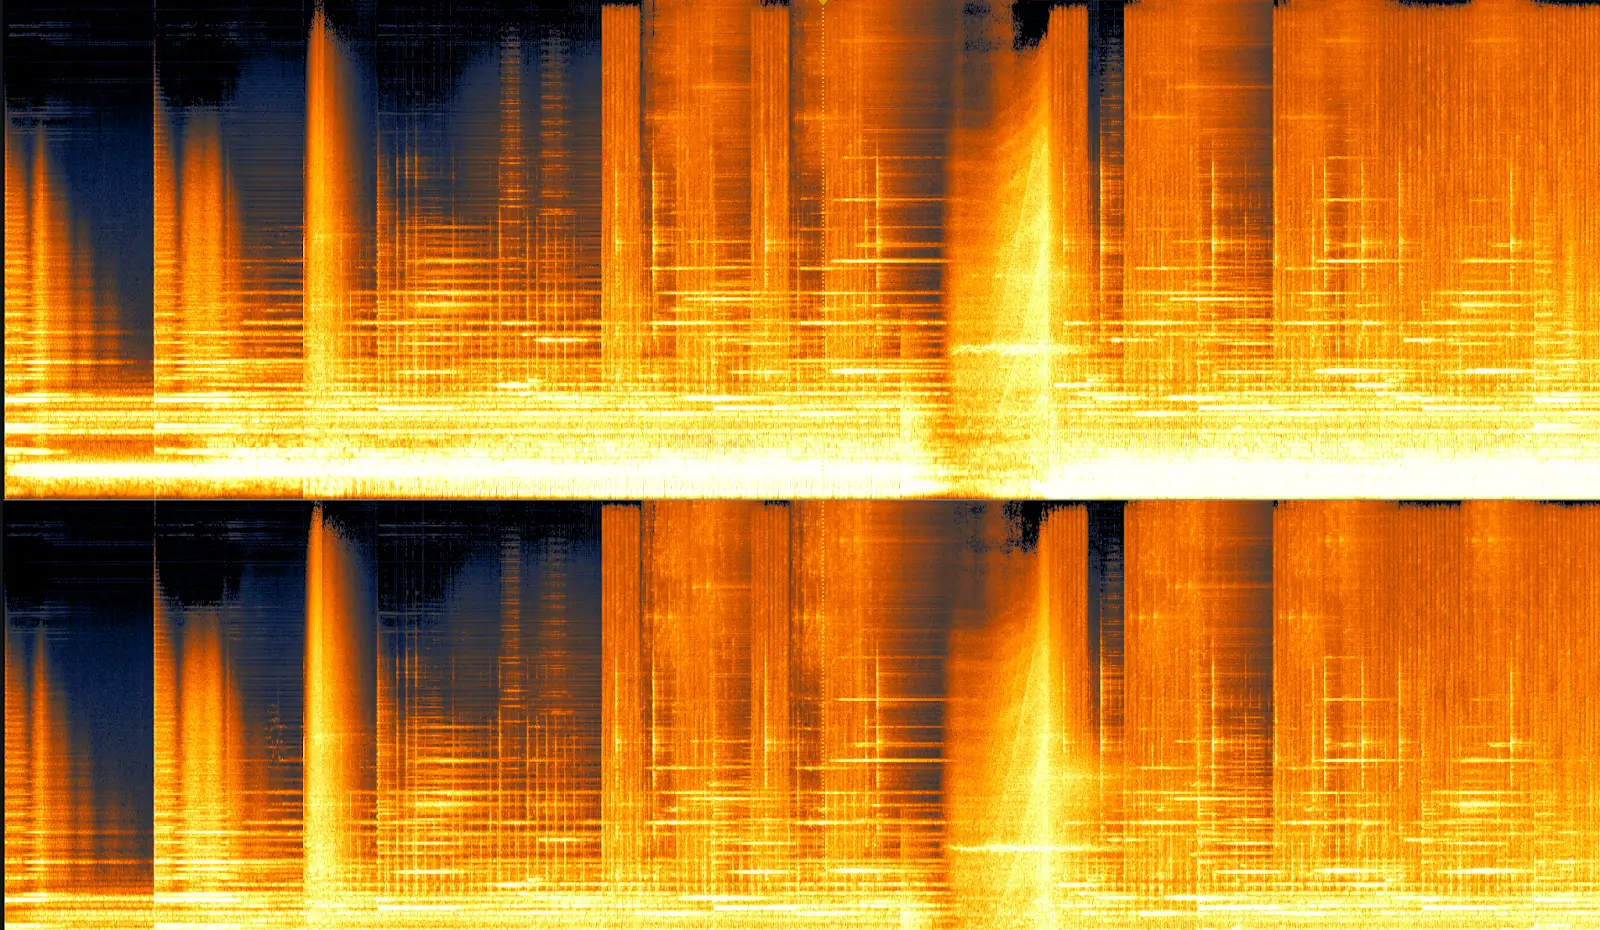 This is also not a moon, but it's the same audio file as above in spectrogram form